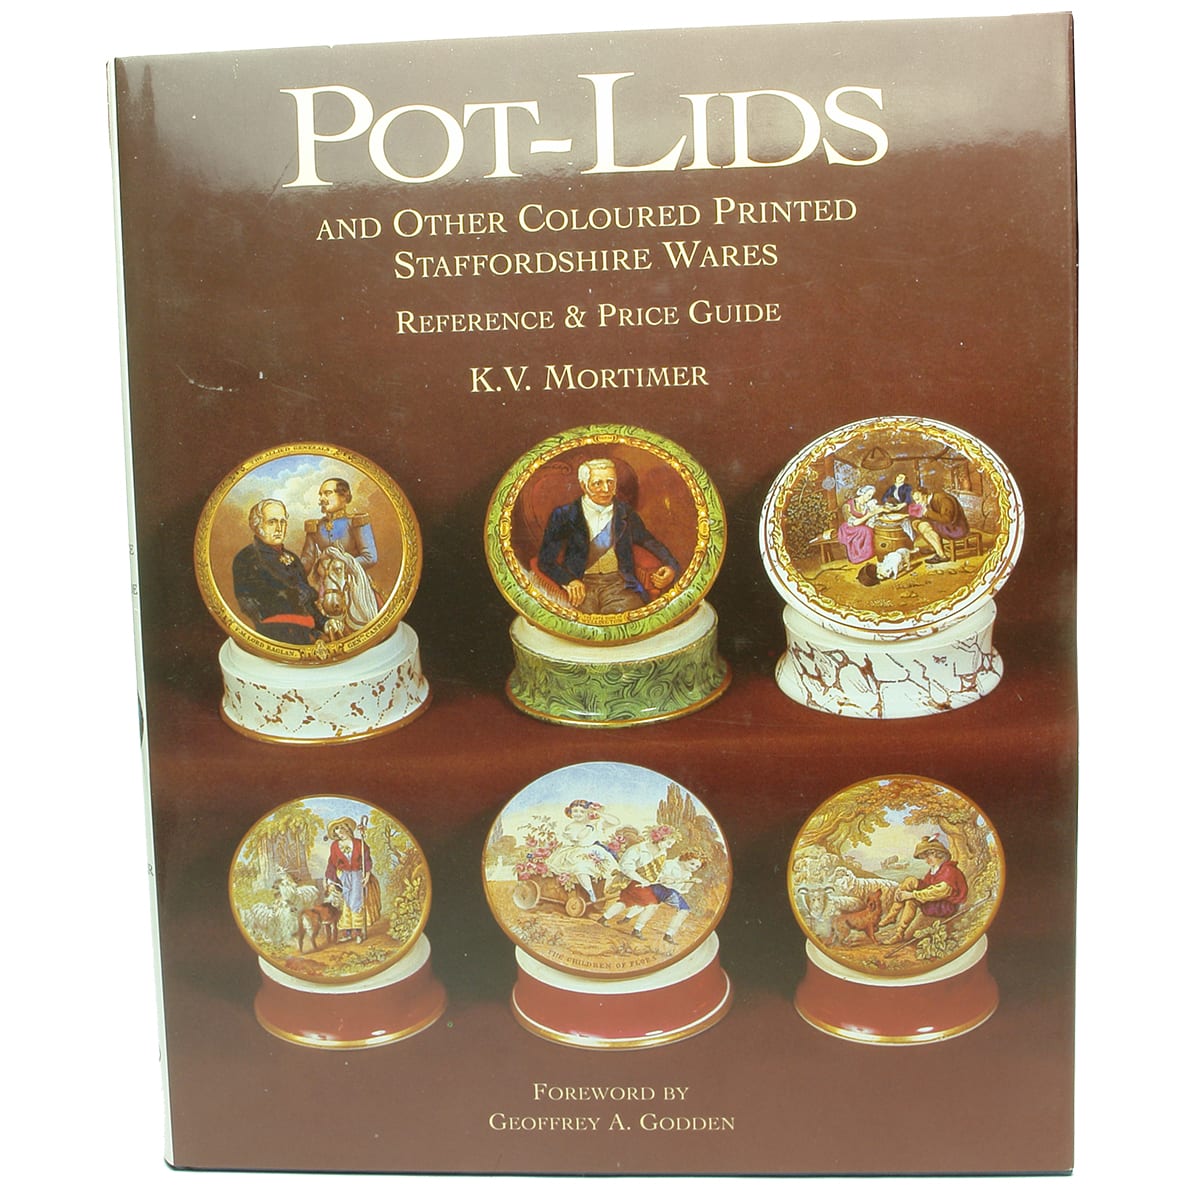 Book. Pot Lids and Other Coloured Printed Staffordshire Wares, Reference & Price Guide, K. V. Mortimer, 2003.